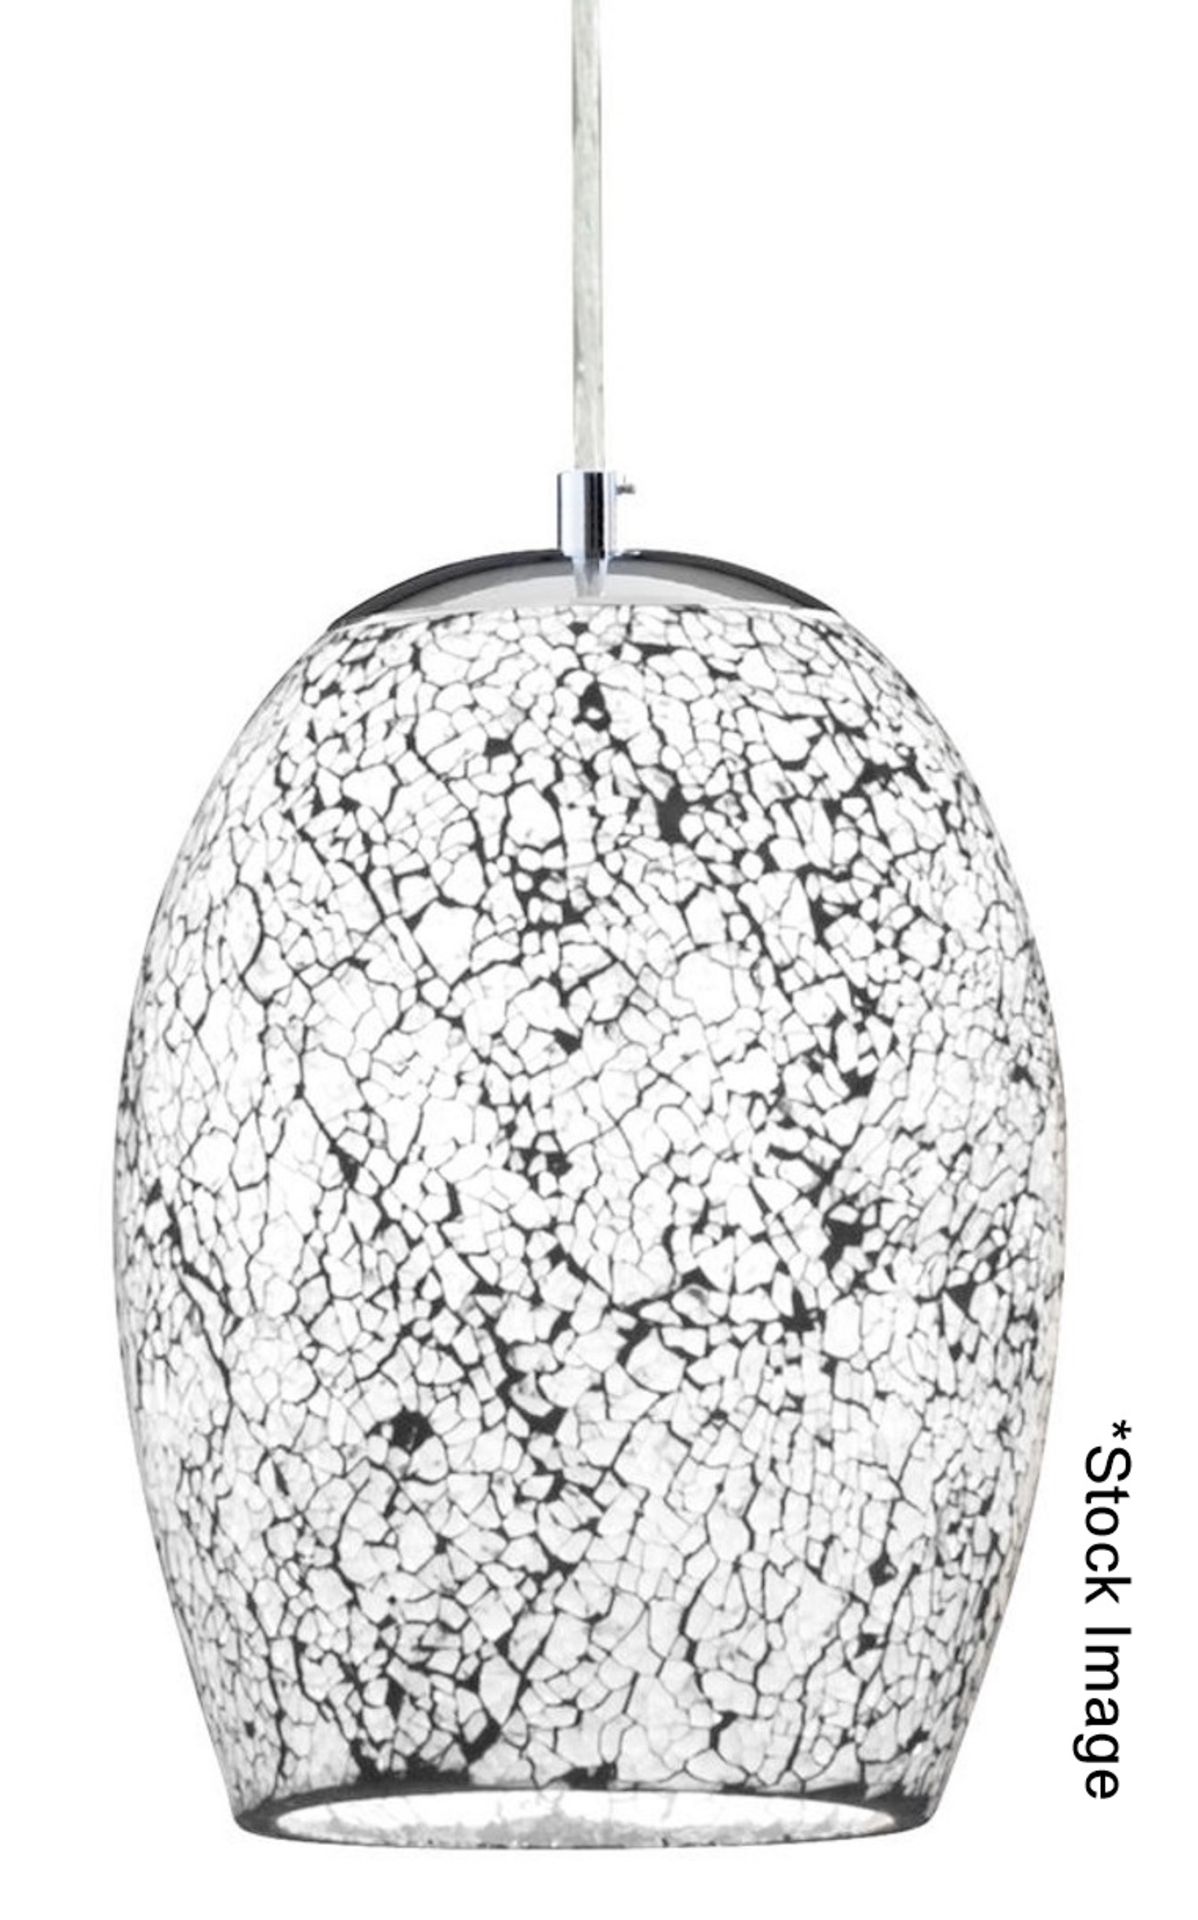 1 x SEARCHLIGHT Crackle Oval Satin Silver With White And Black Ceiling Glass Pendant 25cm - Image 2 of 2